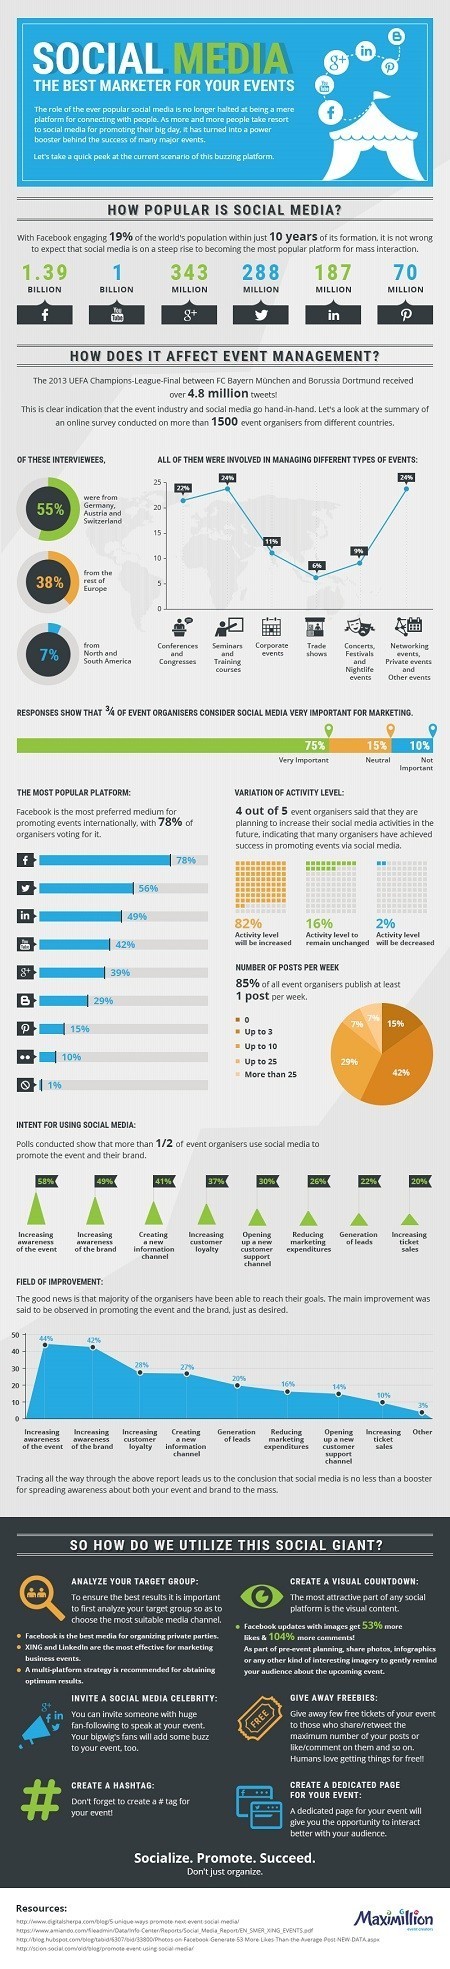 Social Media Is the Best Marketer for Your Events #Infographic | Daily Magazine | Scoop.it